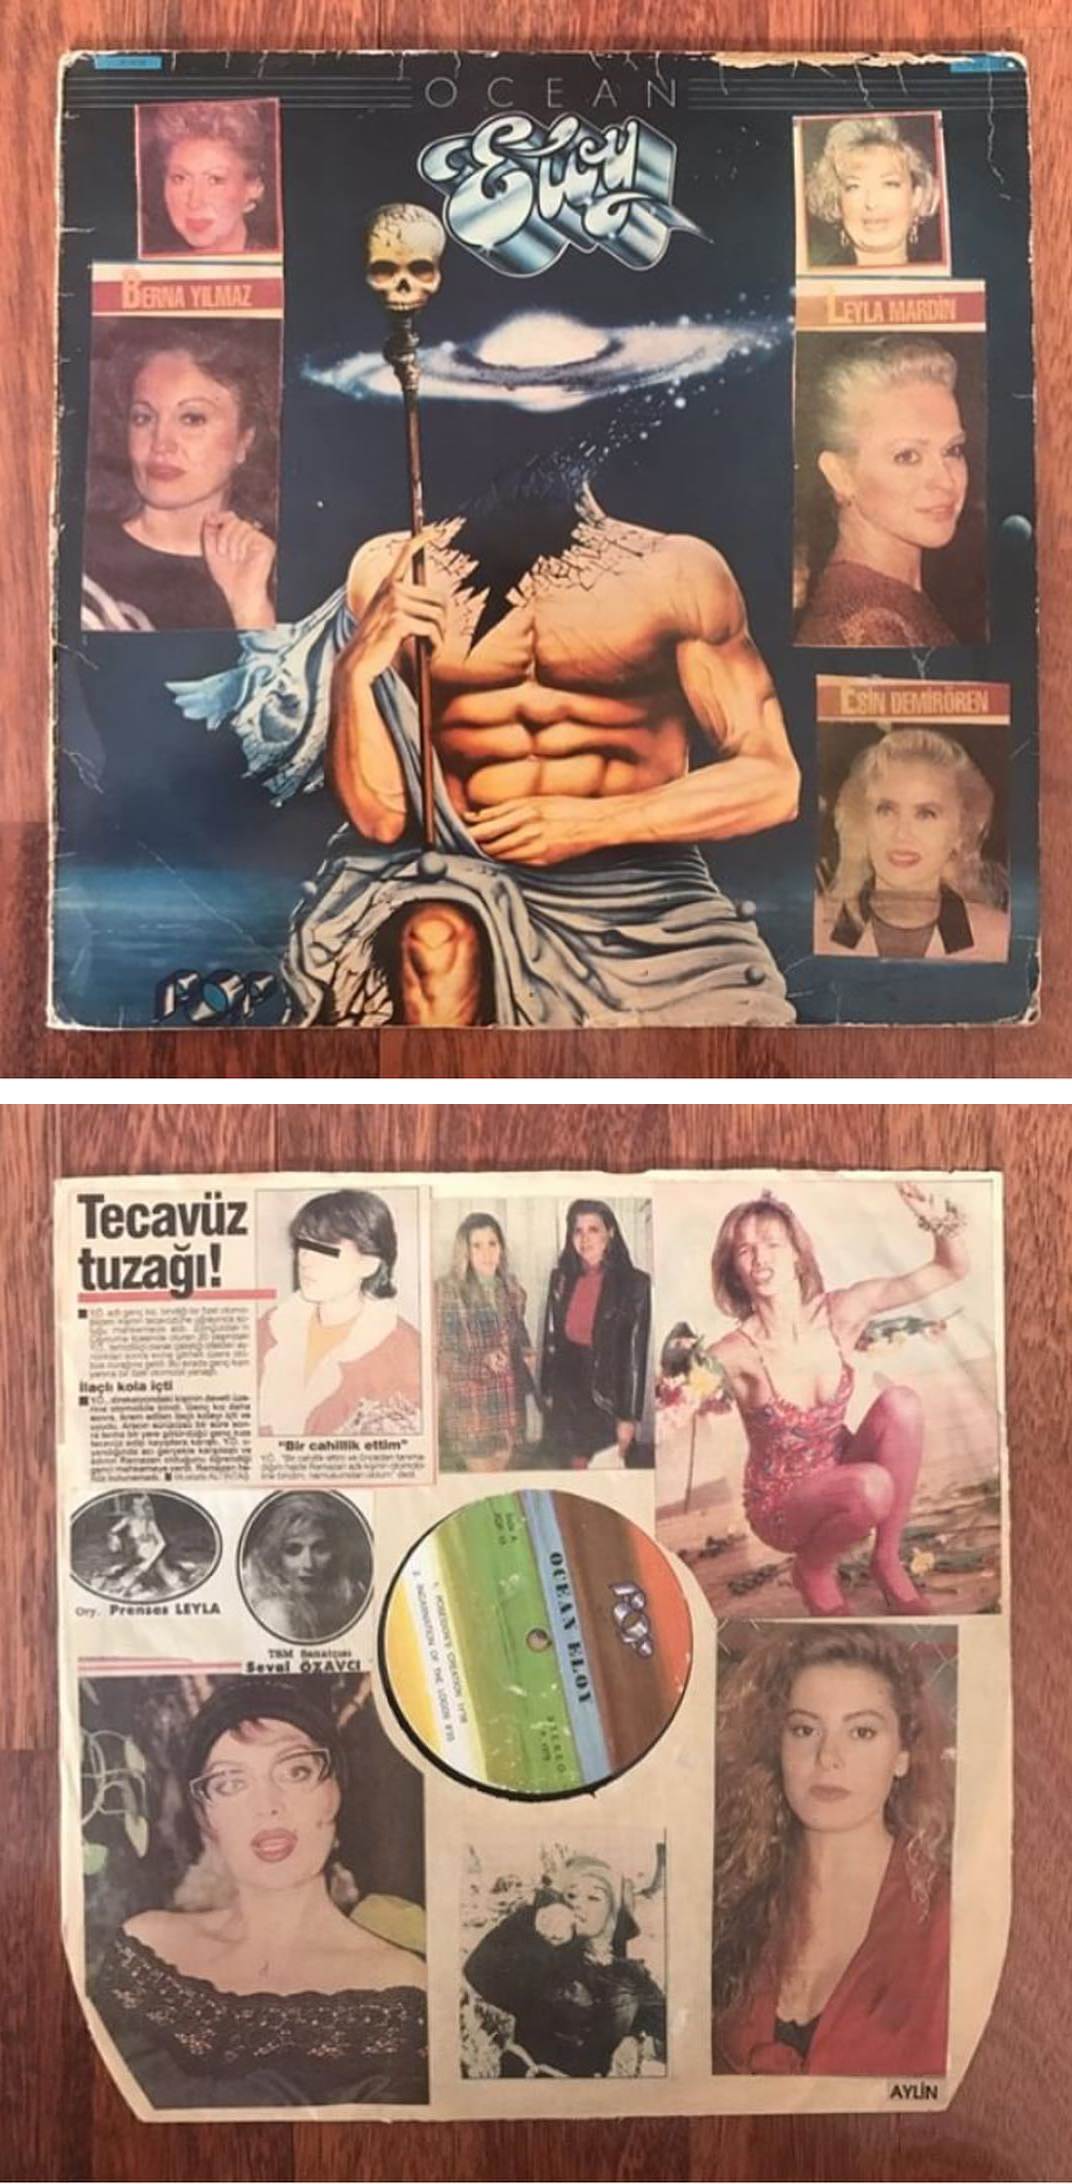 Discovered this copy of ‘Ocean’ by Kraut prog rockers, Eloy in Turkey. This particular copy is covered inside and out (swipe to reveal inner sleeve) with creepy clippings of old famous Turkish actresses, singers, and wives of businessmen.